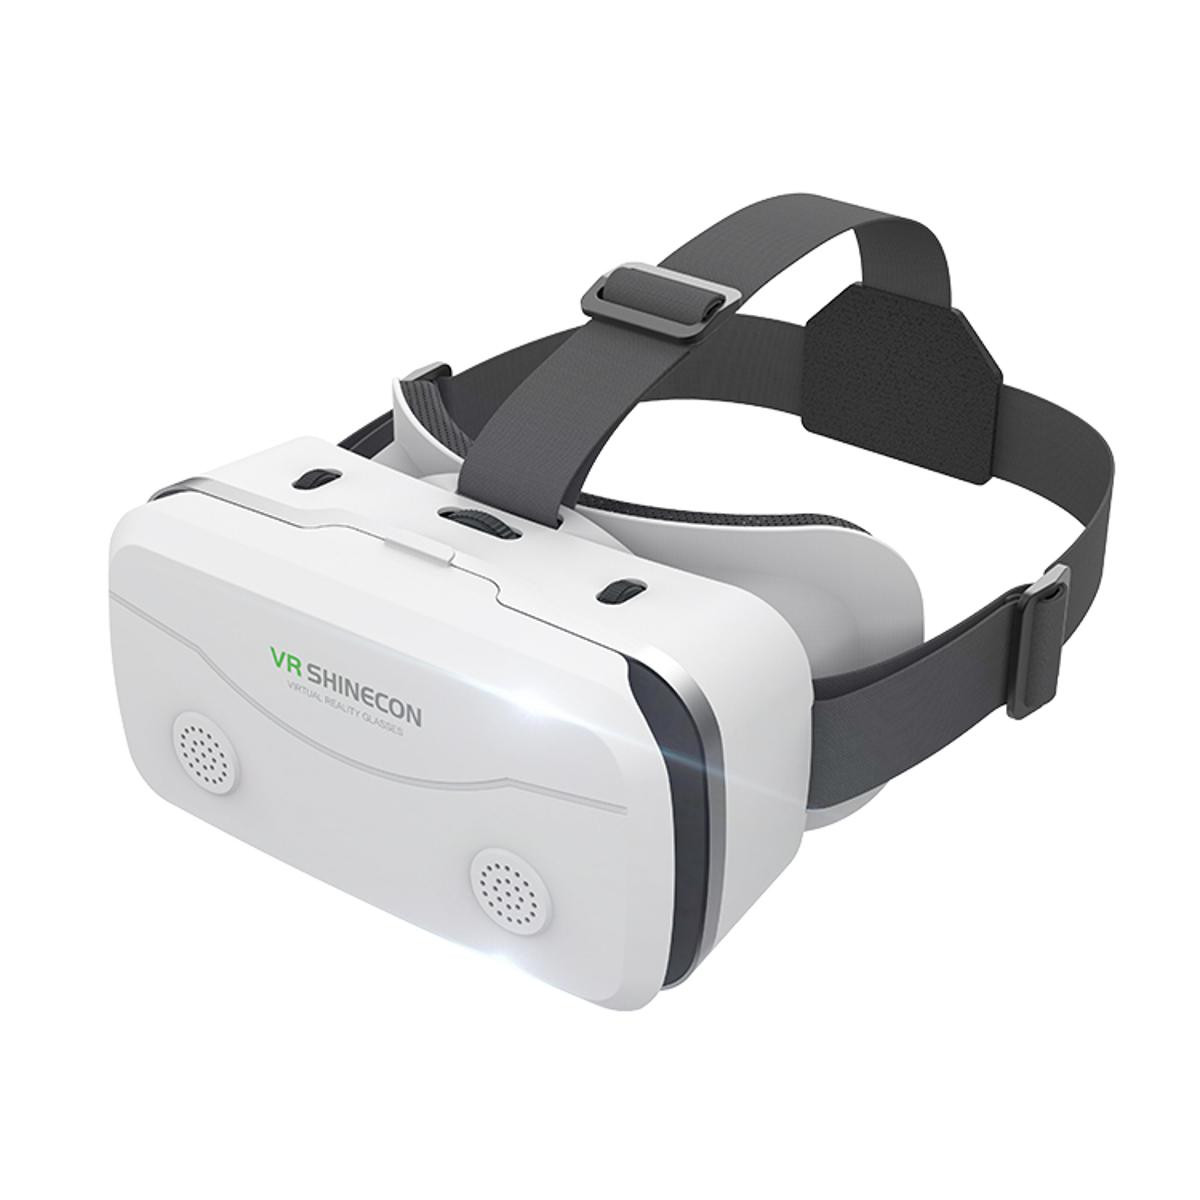 VR Shinecon SC-G15 3D Virtual Reality Box Gaming Glasses Headset for 4.5-7 inch Smartphones - White